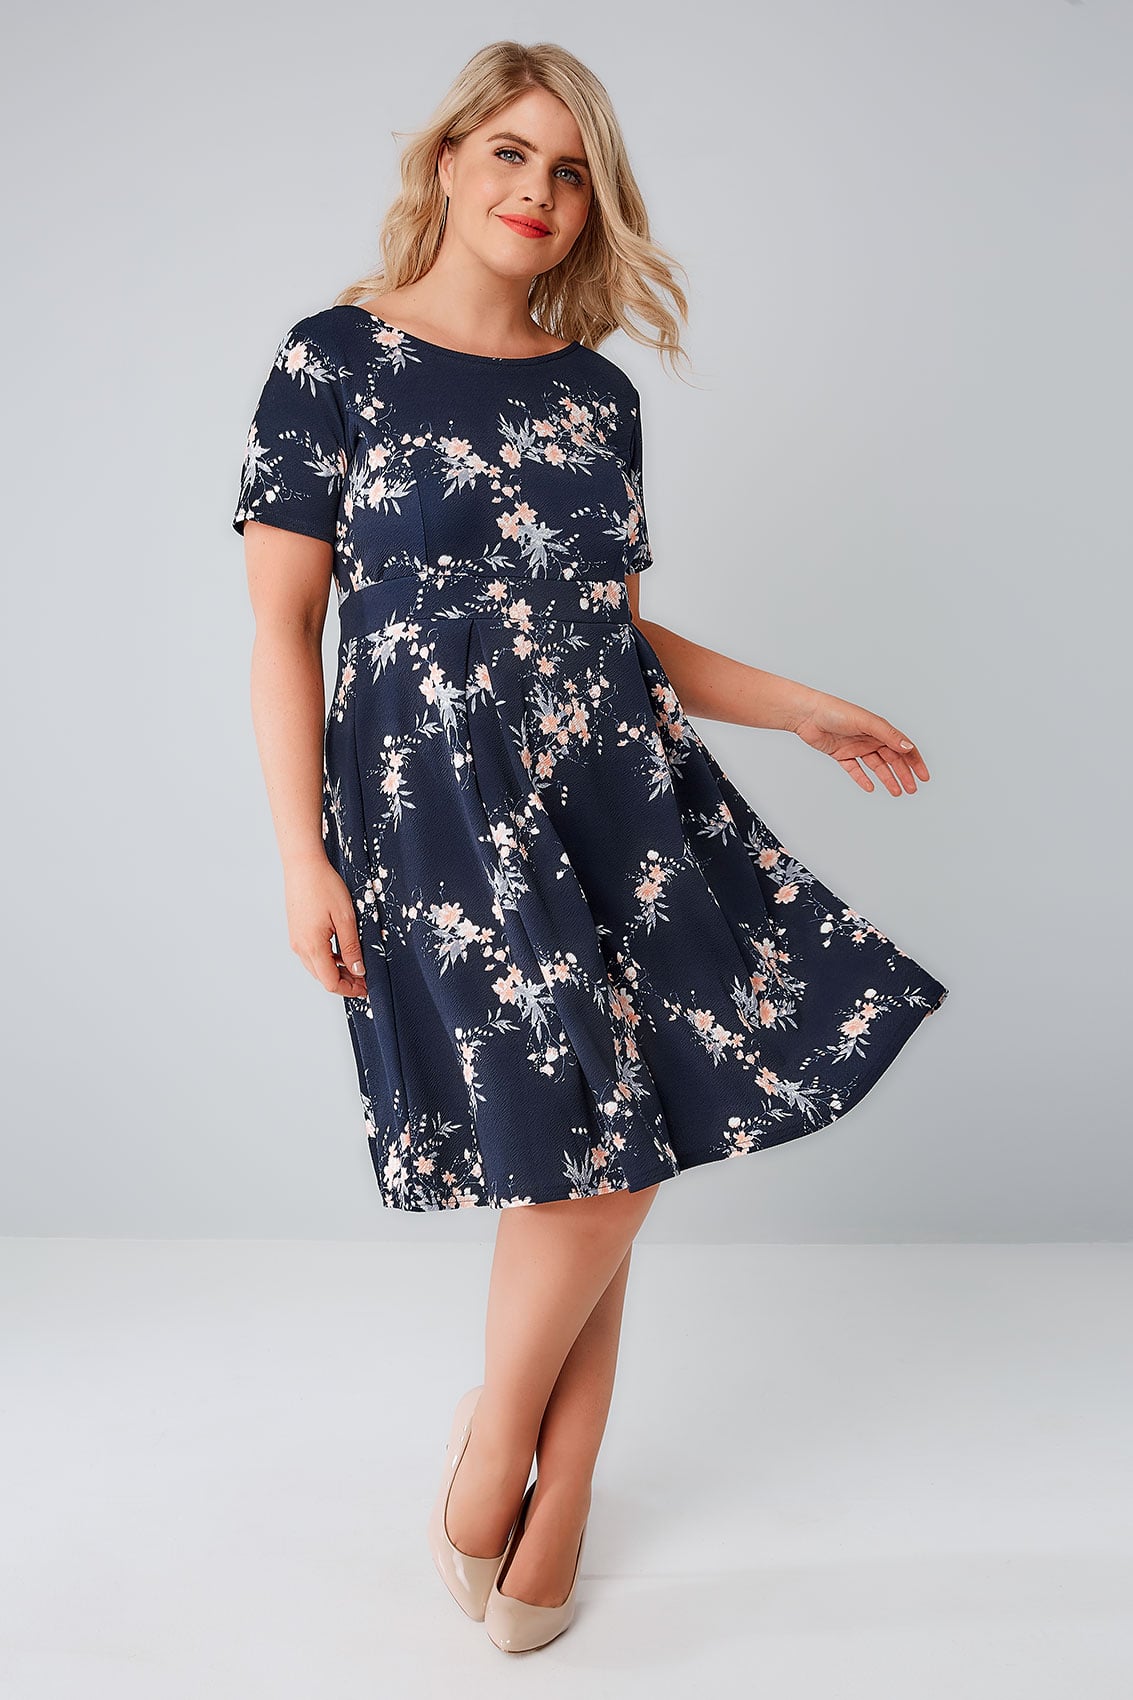 SIENNA COUTURE Navy & Multi Floral Sleeved Skater Dress, Plus size 16 to 26